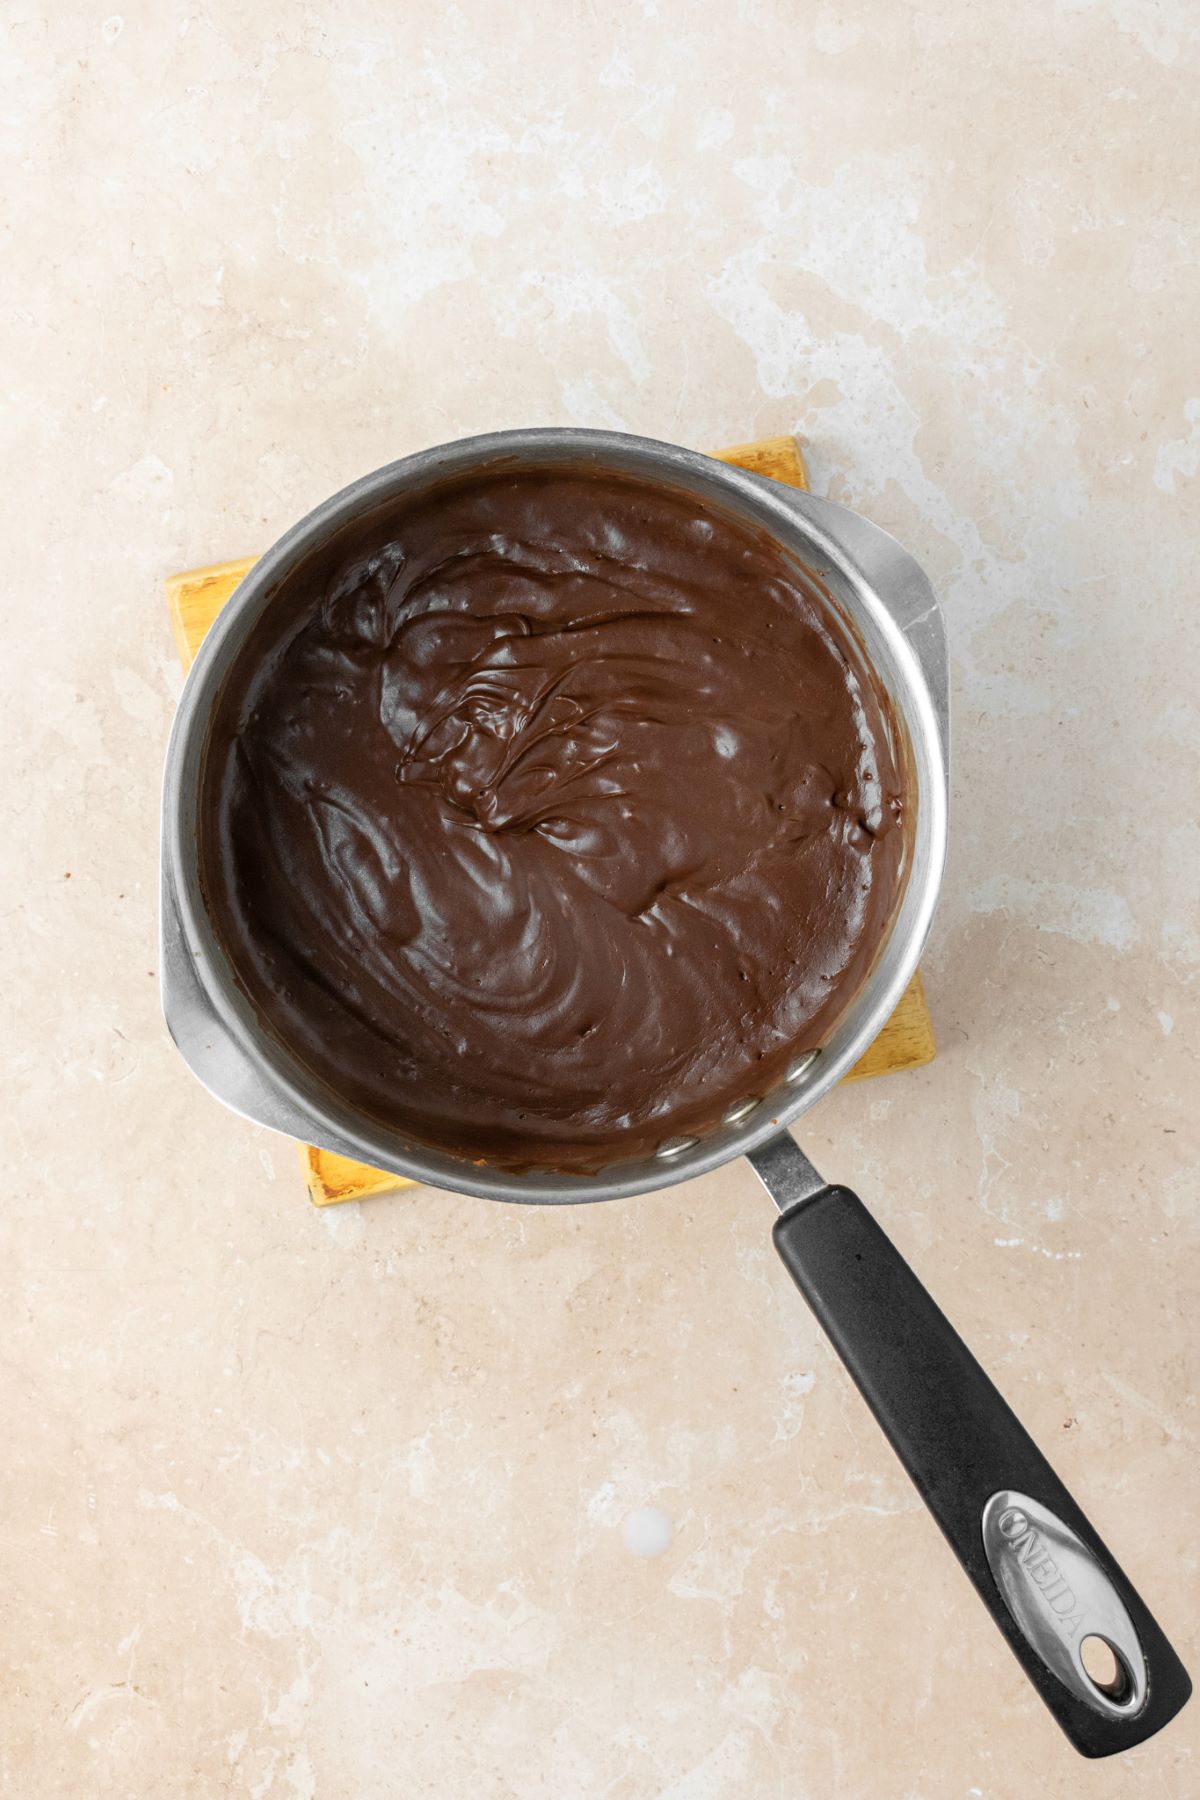 Chocolate pudding in a saucepan.